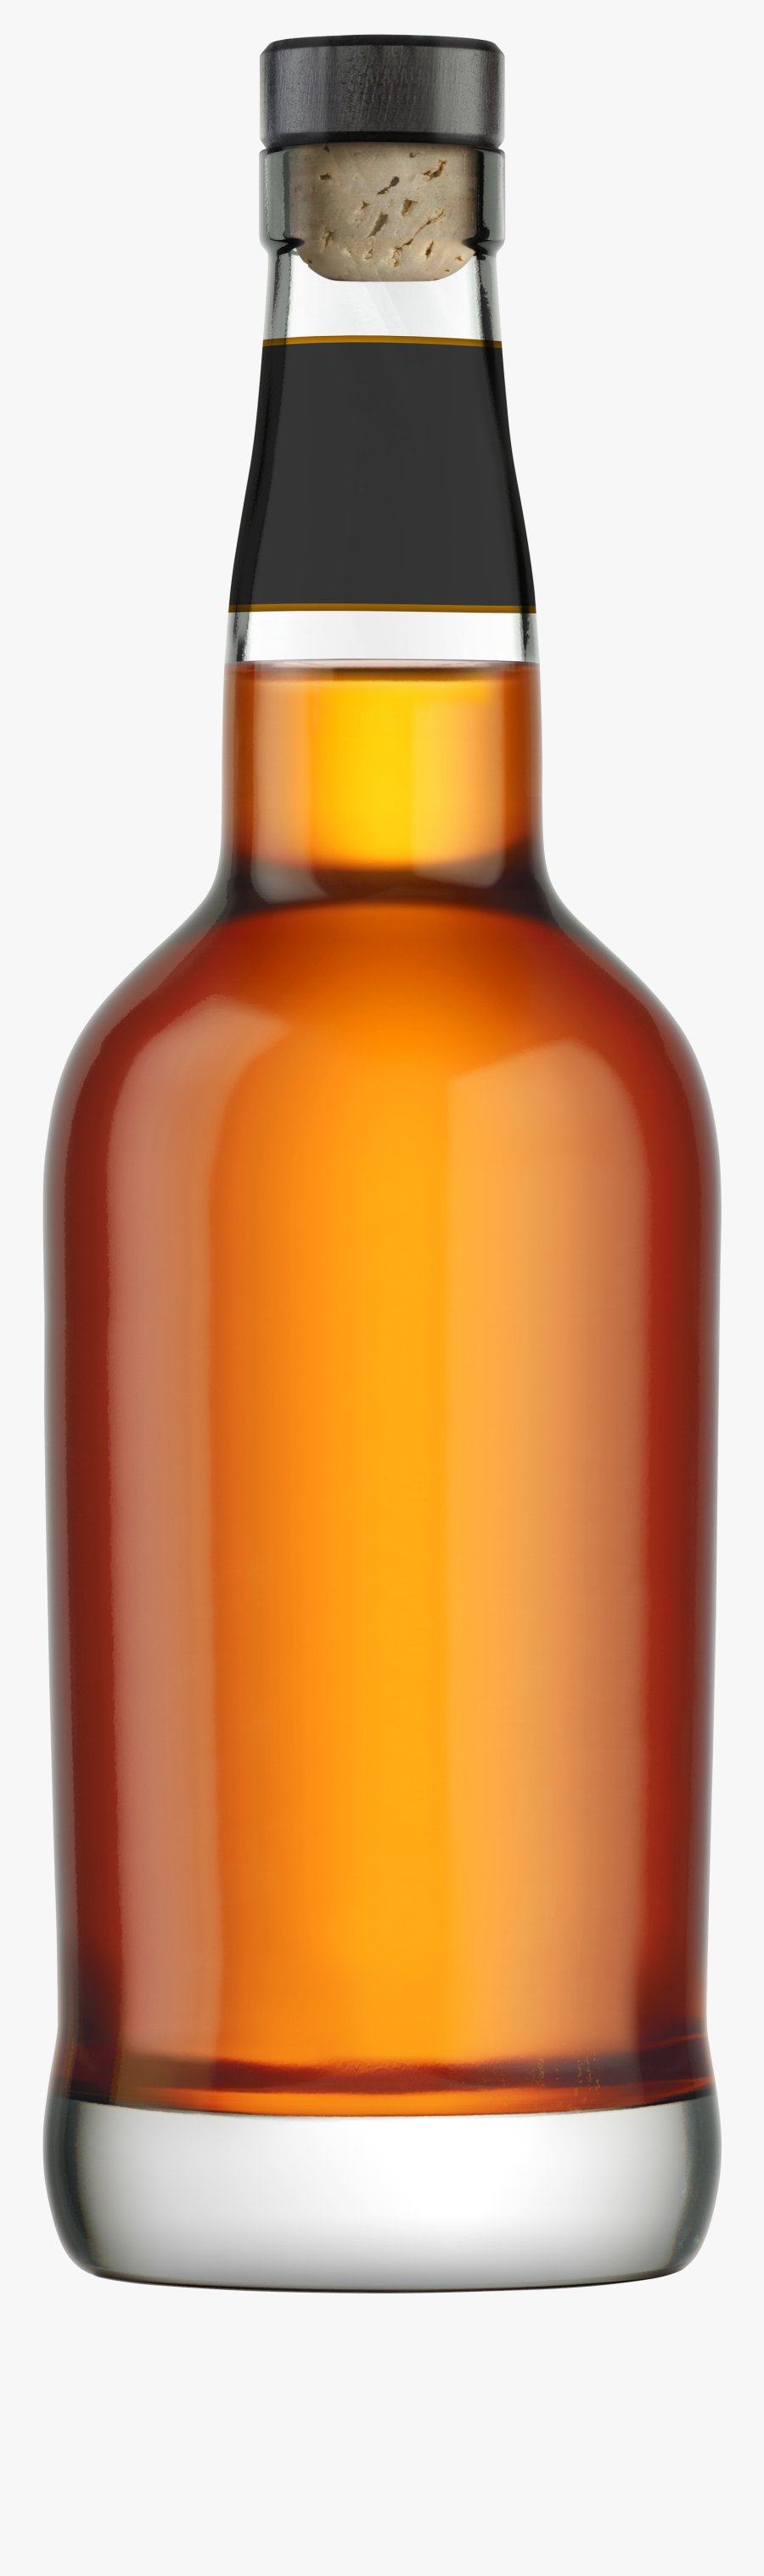 Bottle Of Whiskey Png, Transparent Clipart